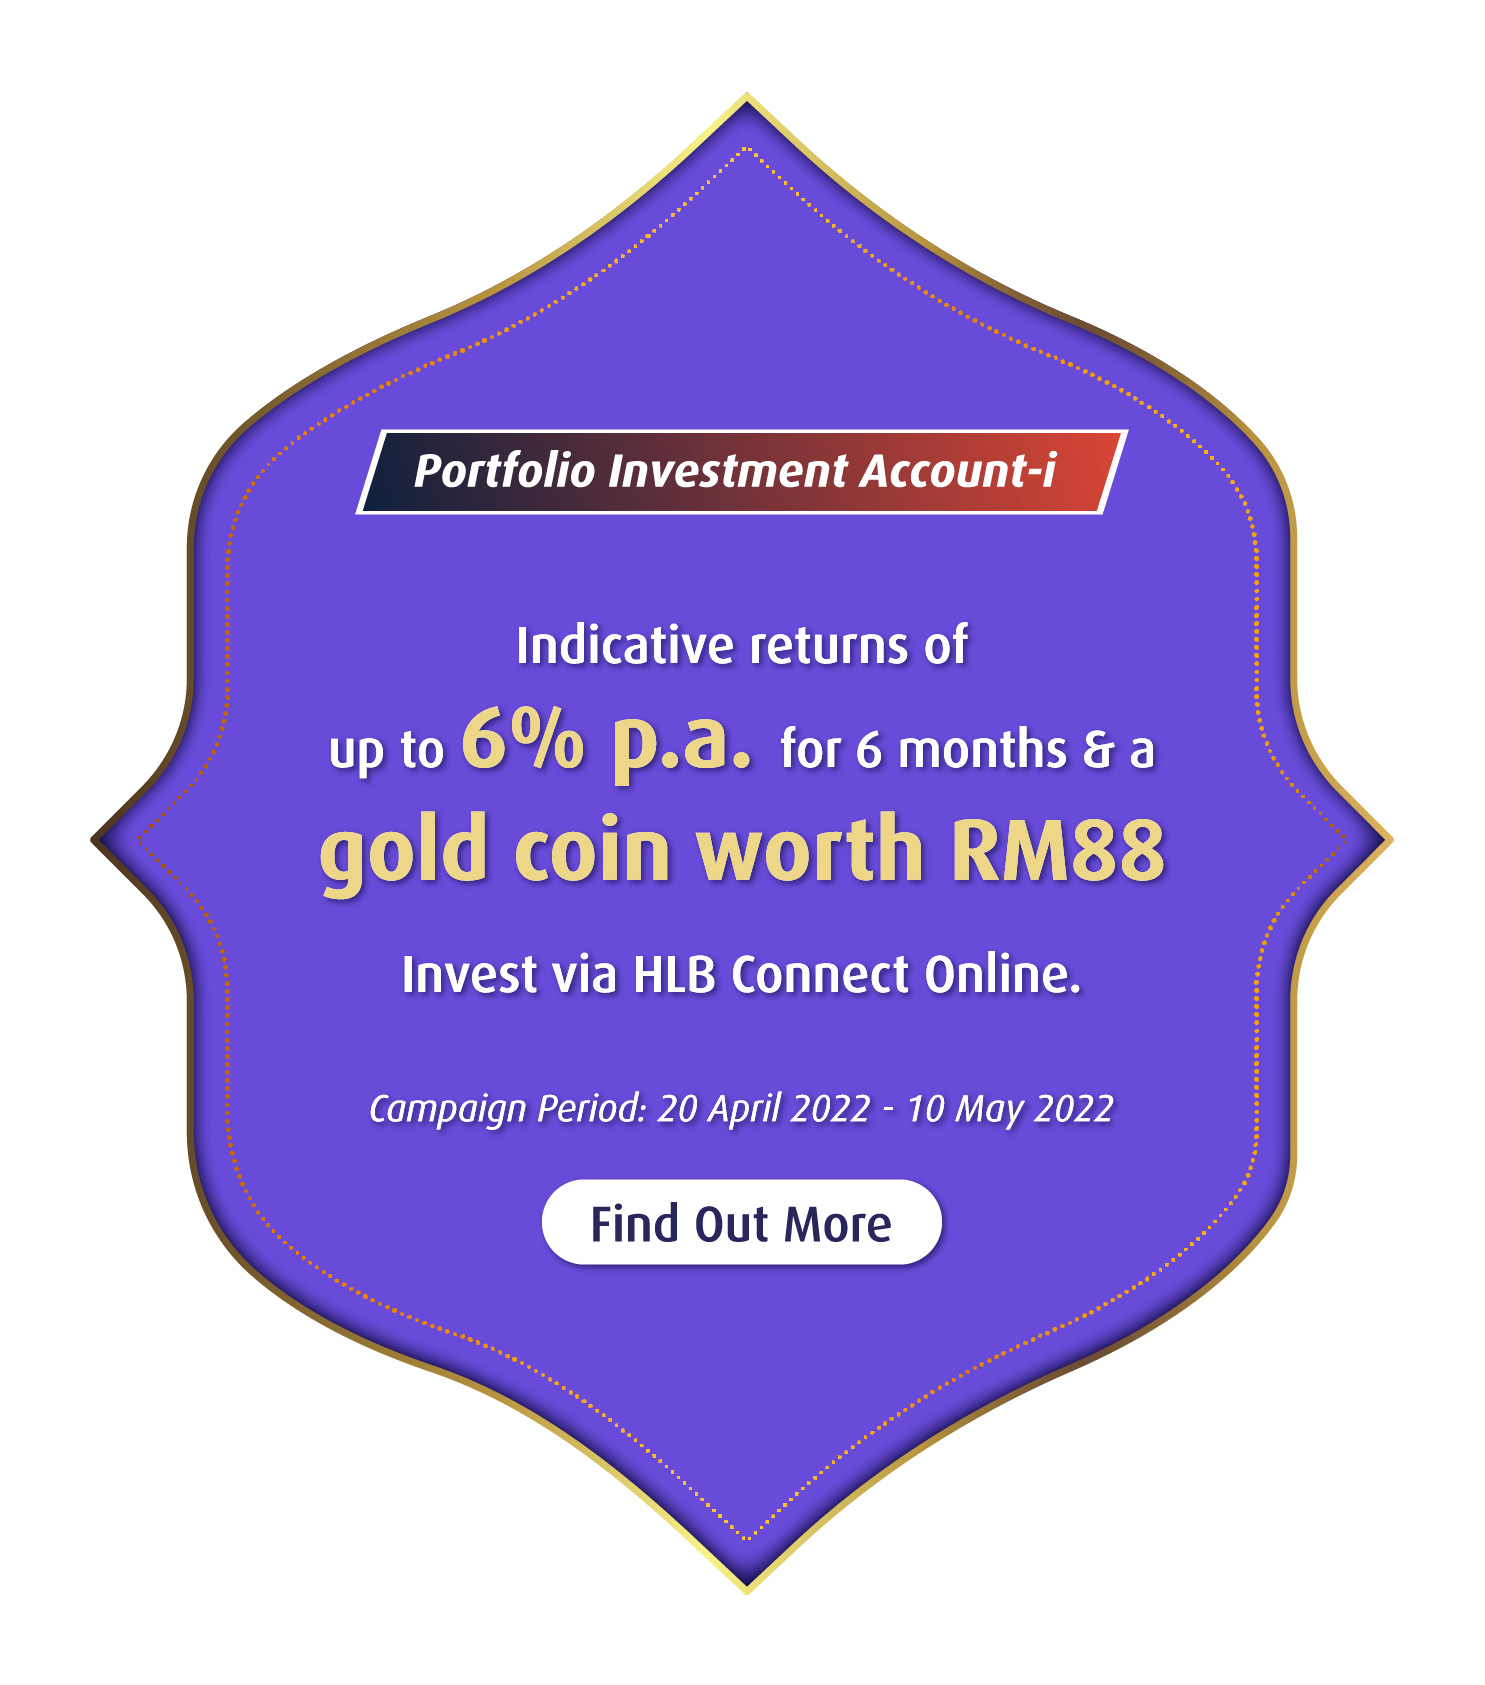 Portfolio Investment Account-i Indicative returns of up to 6% p.a. for 6 months & get a gold coin worth RM88 Invest via HLB Connect Online